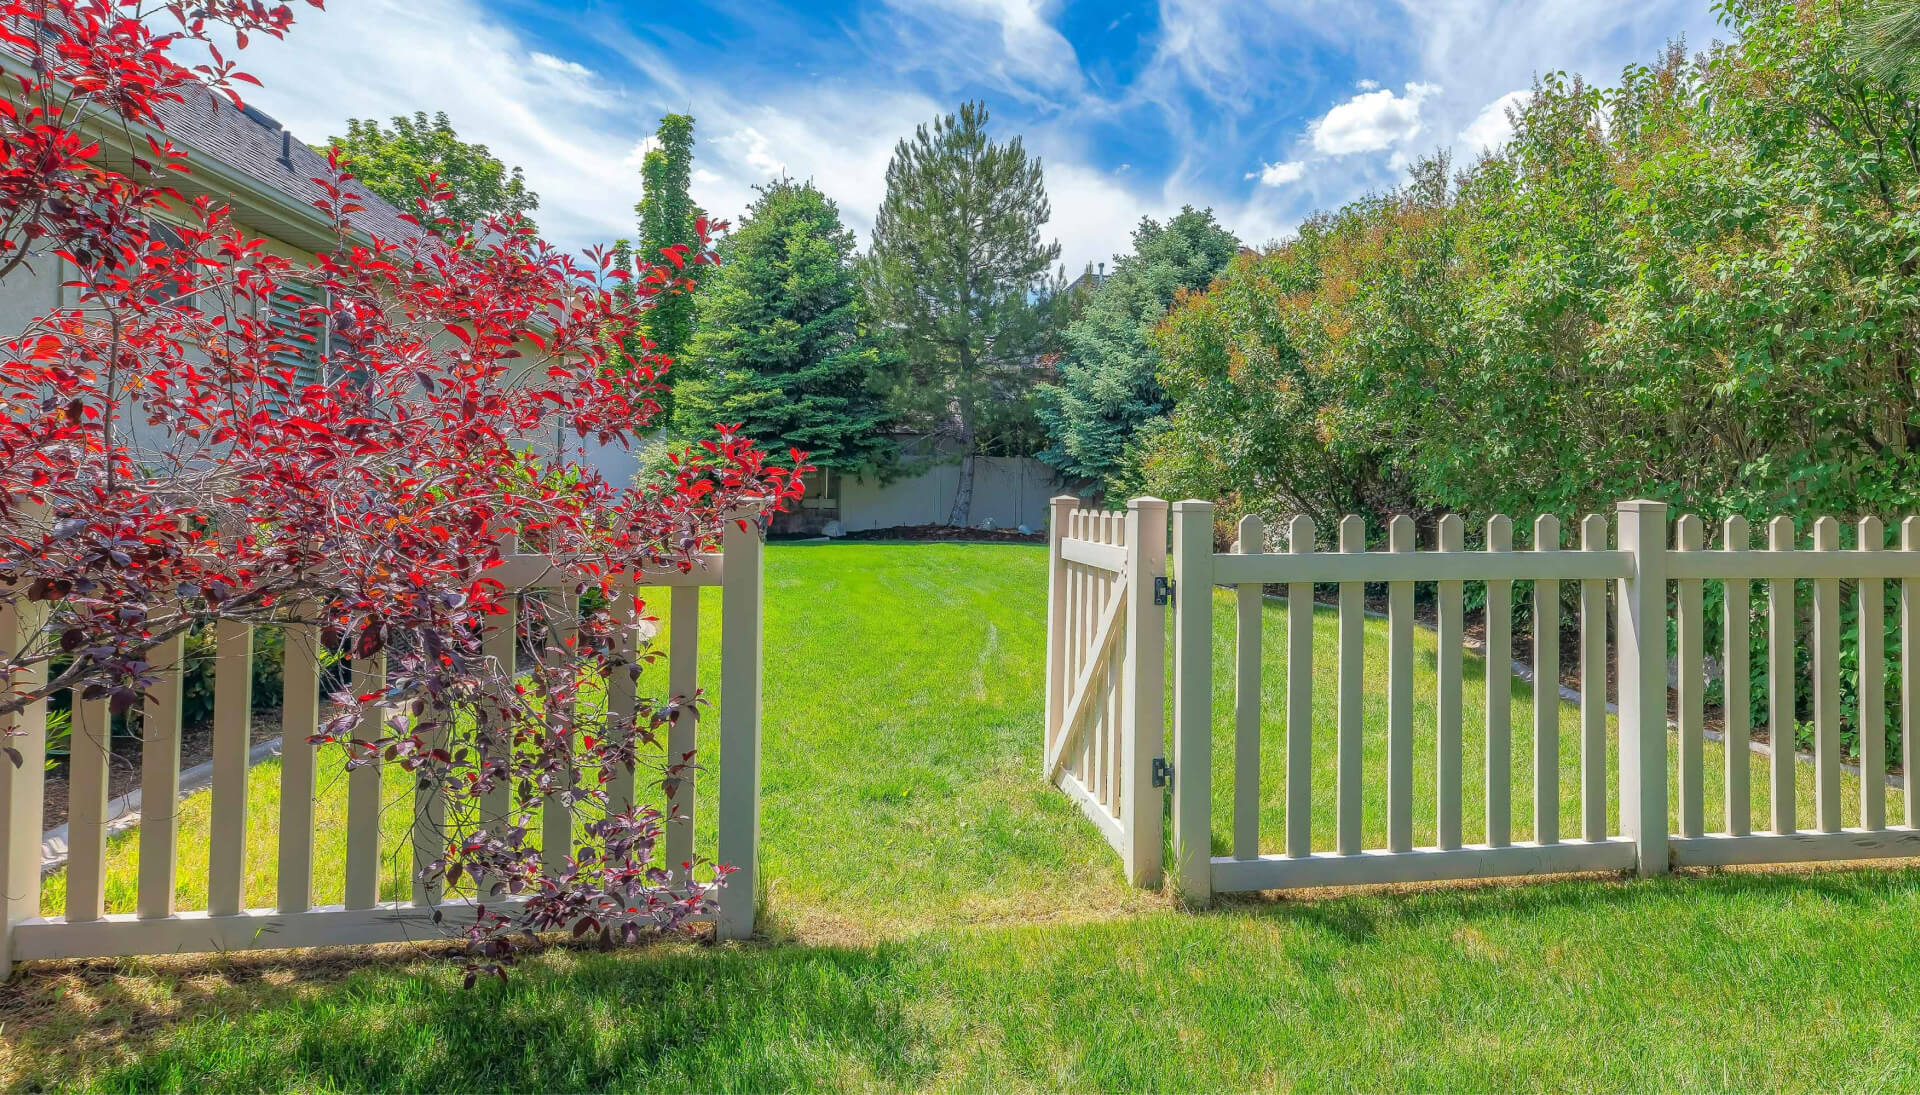 A functional fence gate providing access to a well-maintained backyard, surrounded by a wooden fence in Dayton